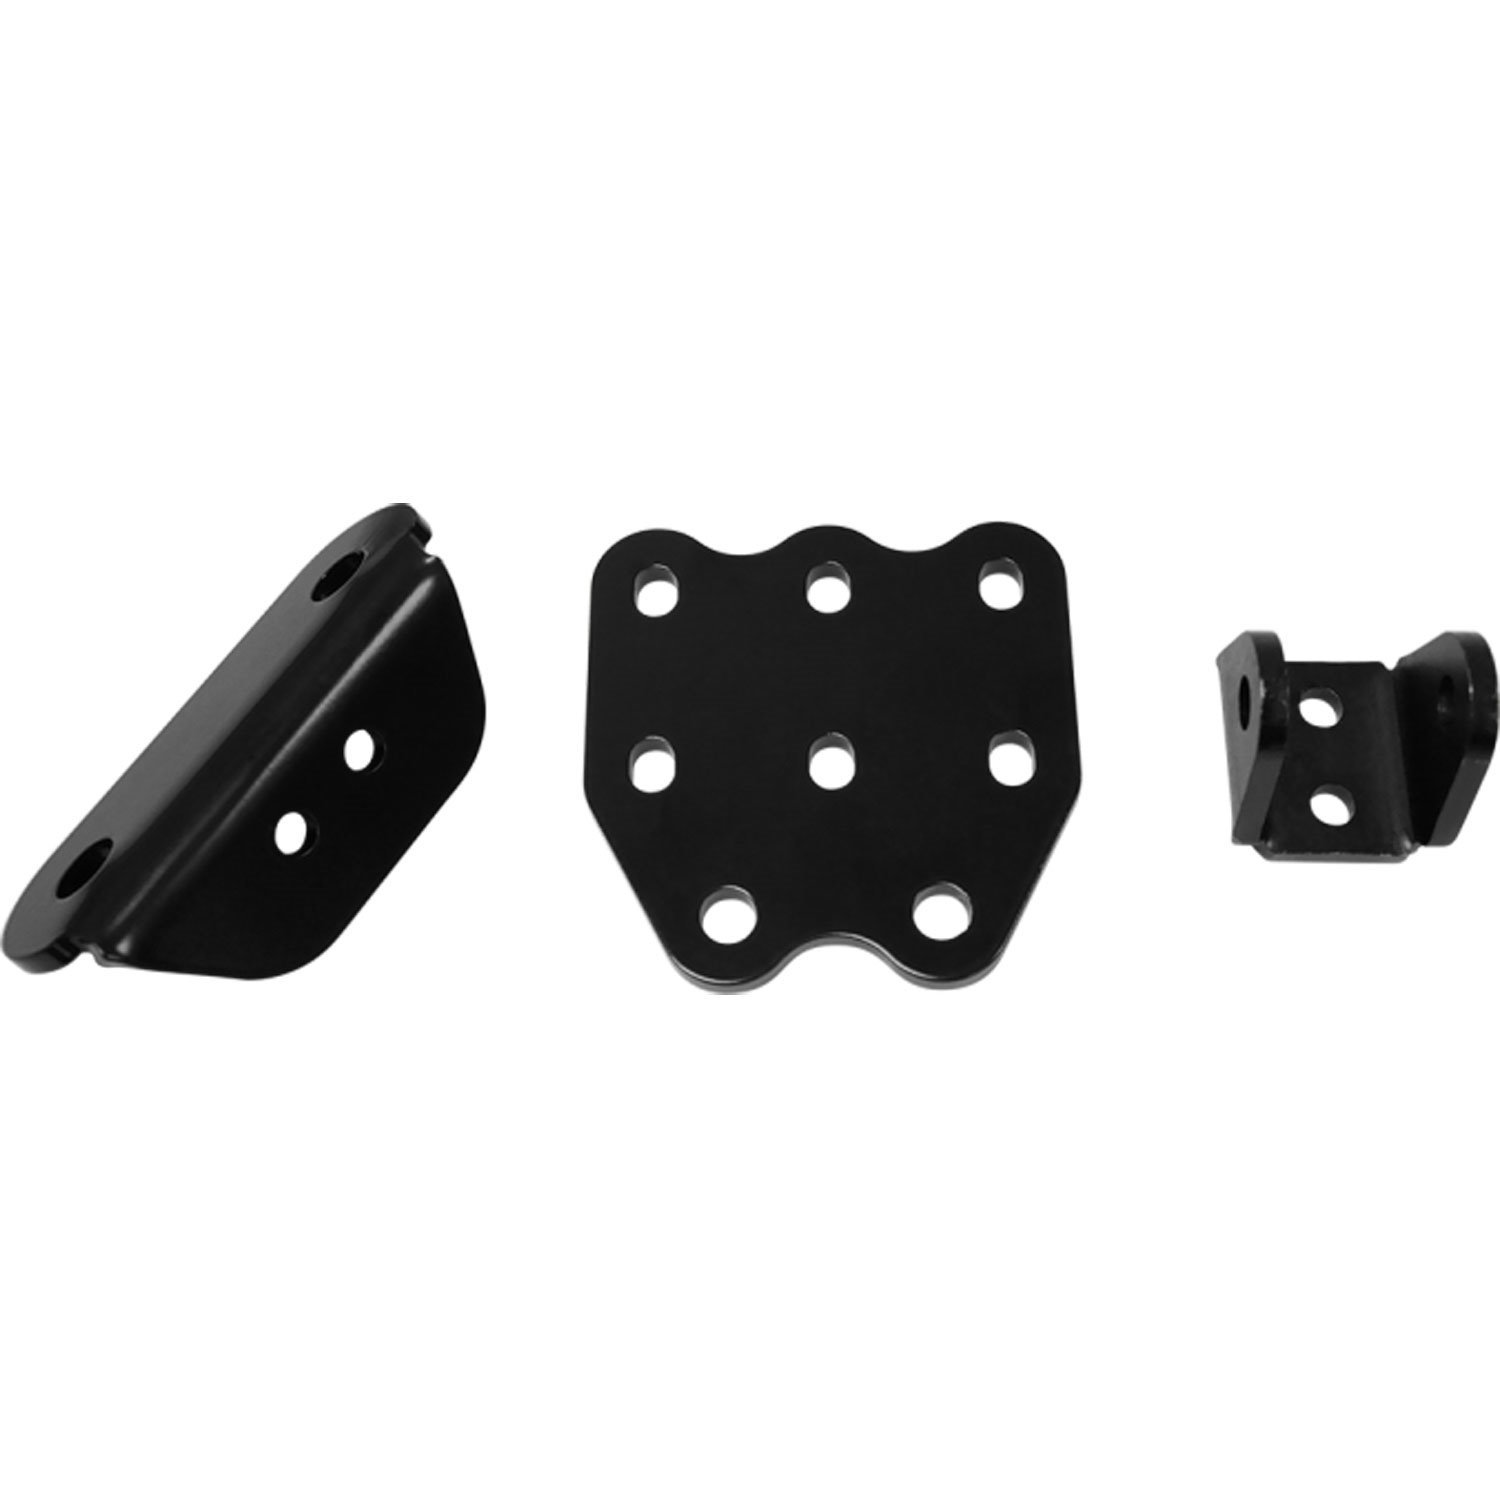 Steering Stabilizer Brackets Fits Ford F150/F250